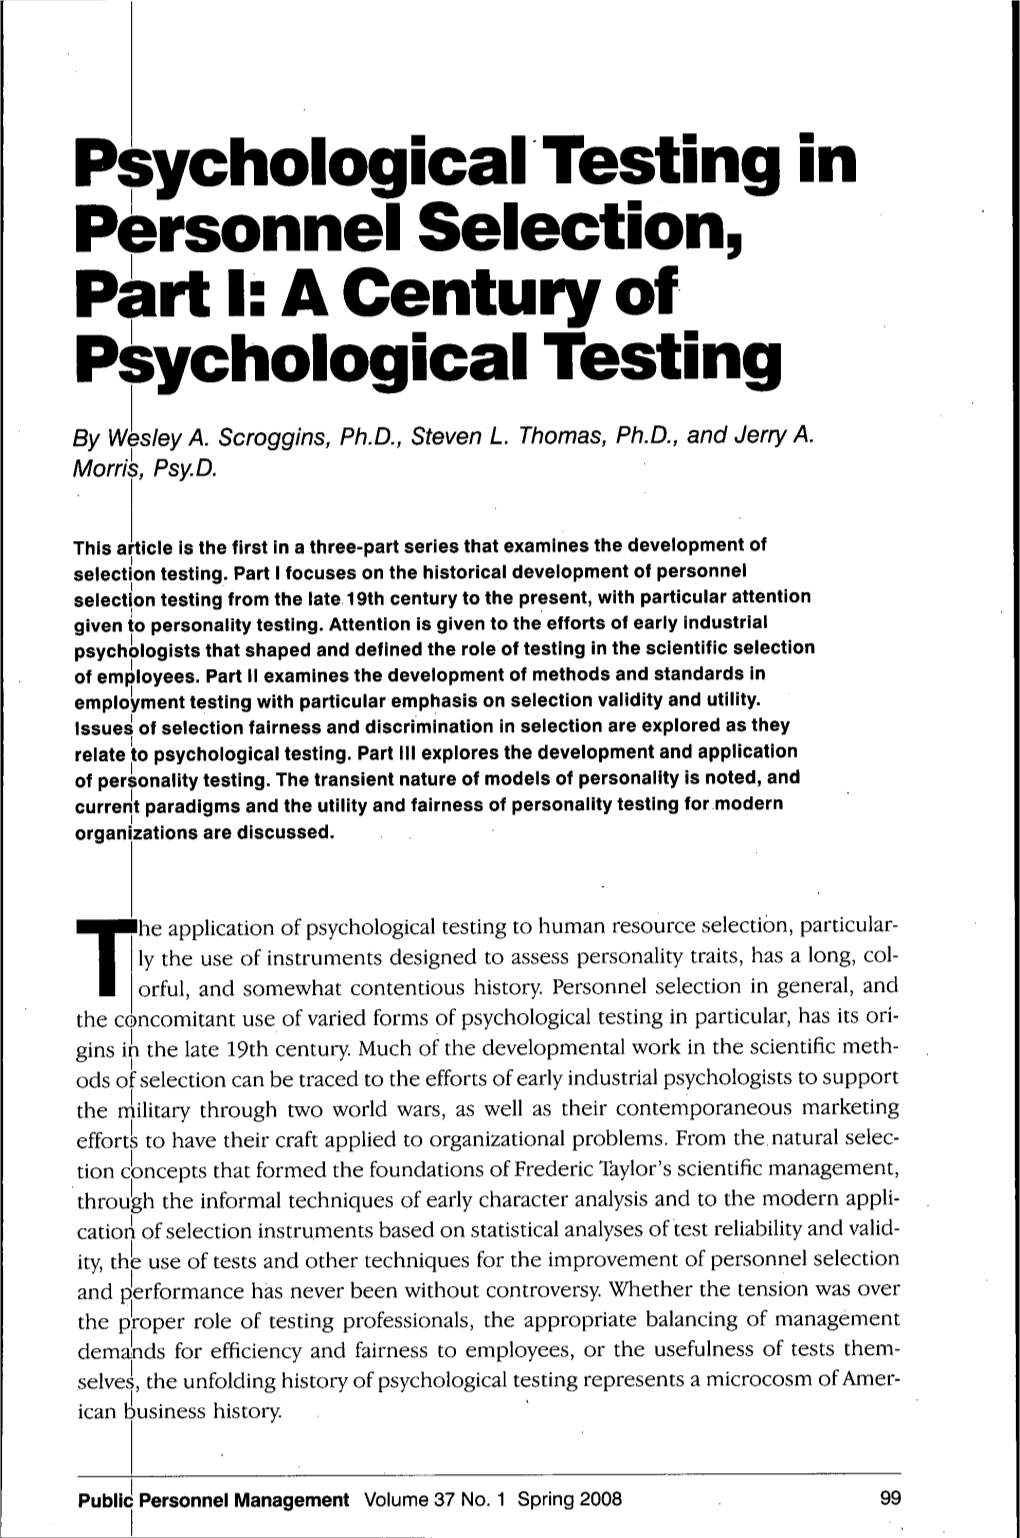 Psychological Testing in Personnel Selection, Part I: a Century of Psychological Testing